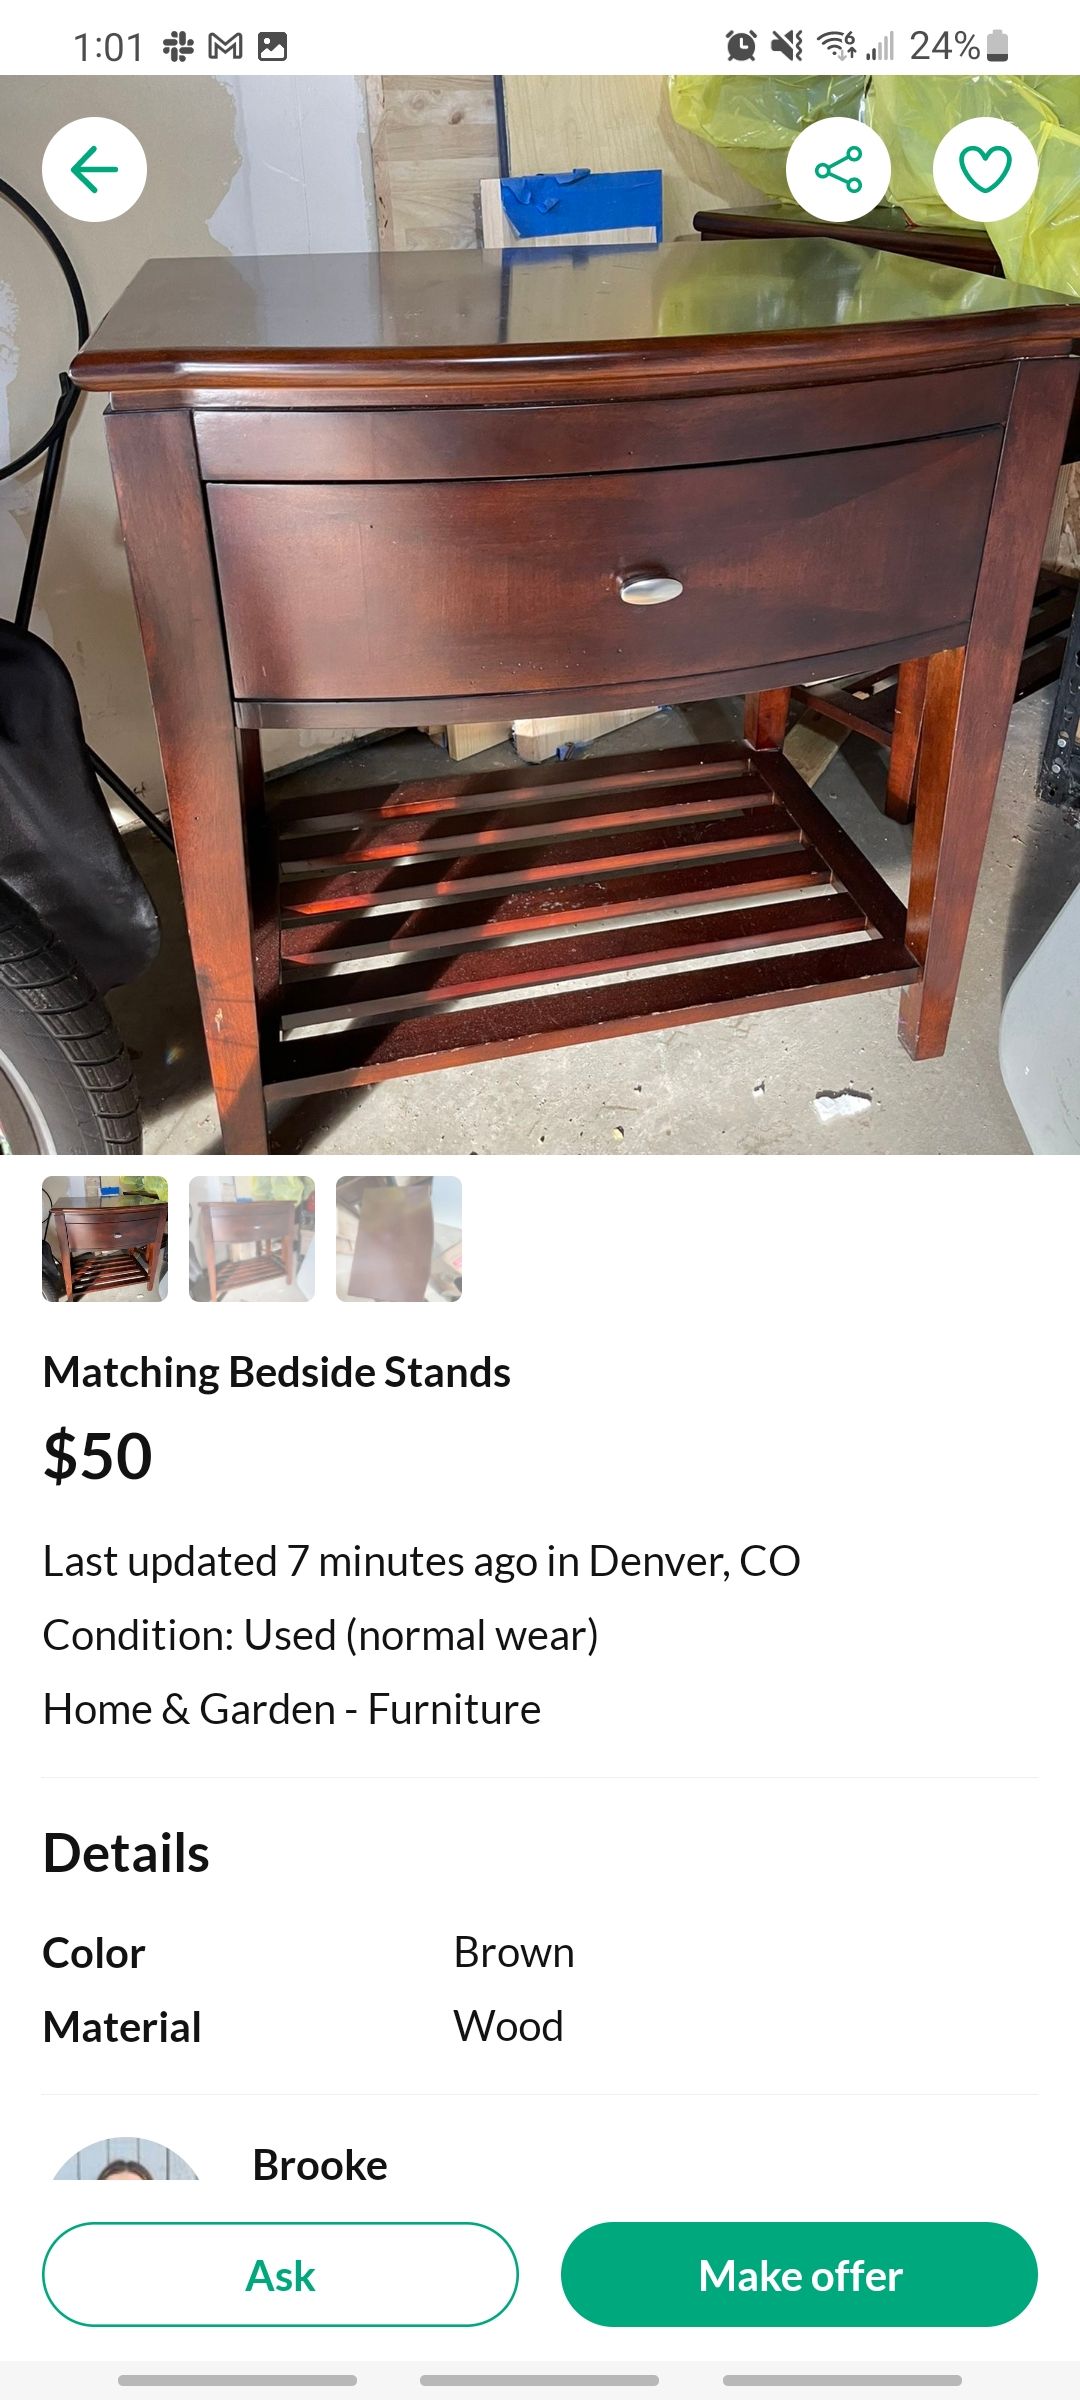 offerup app listing for matching bedside stands